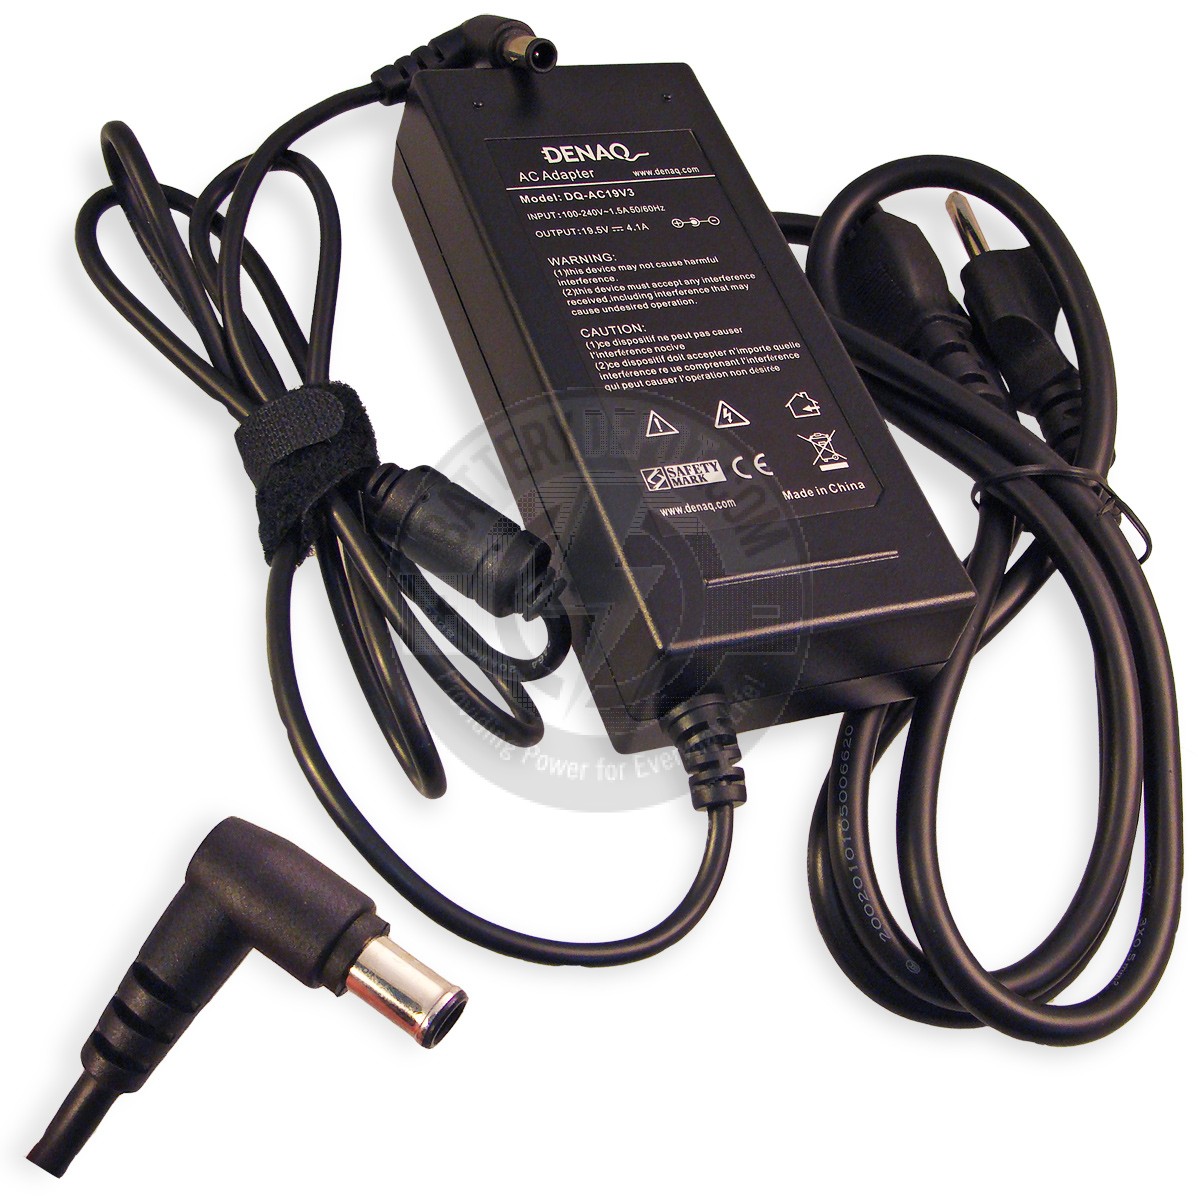 AC Adaptor for Sony Laptop